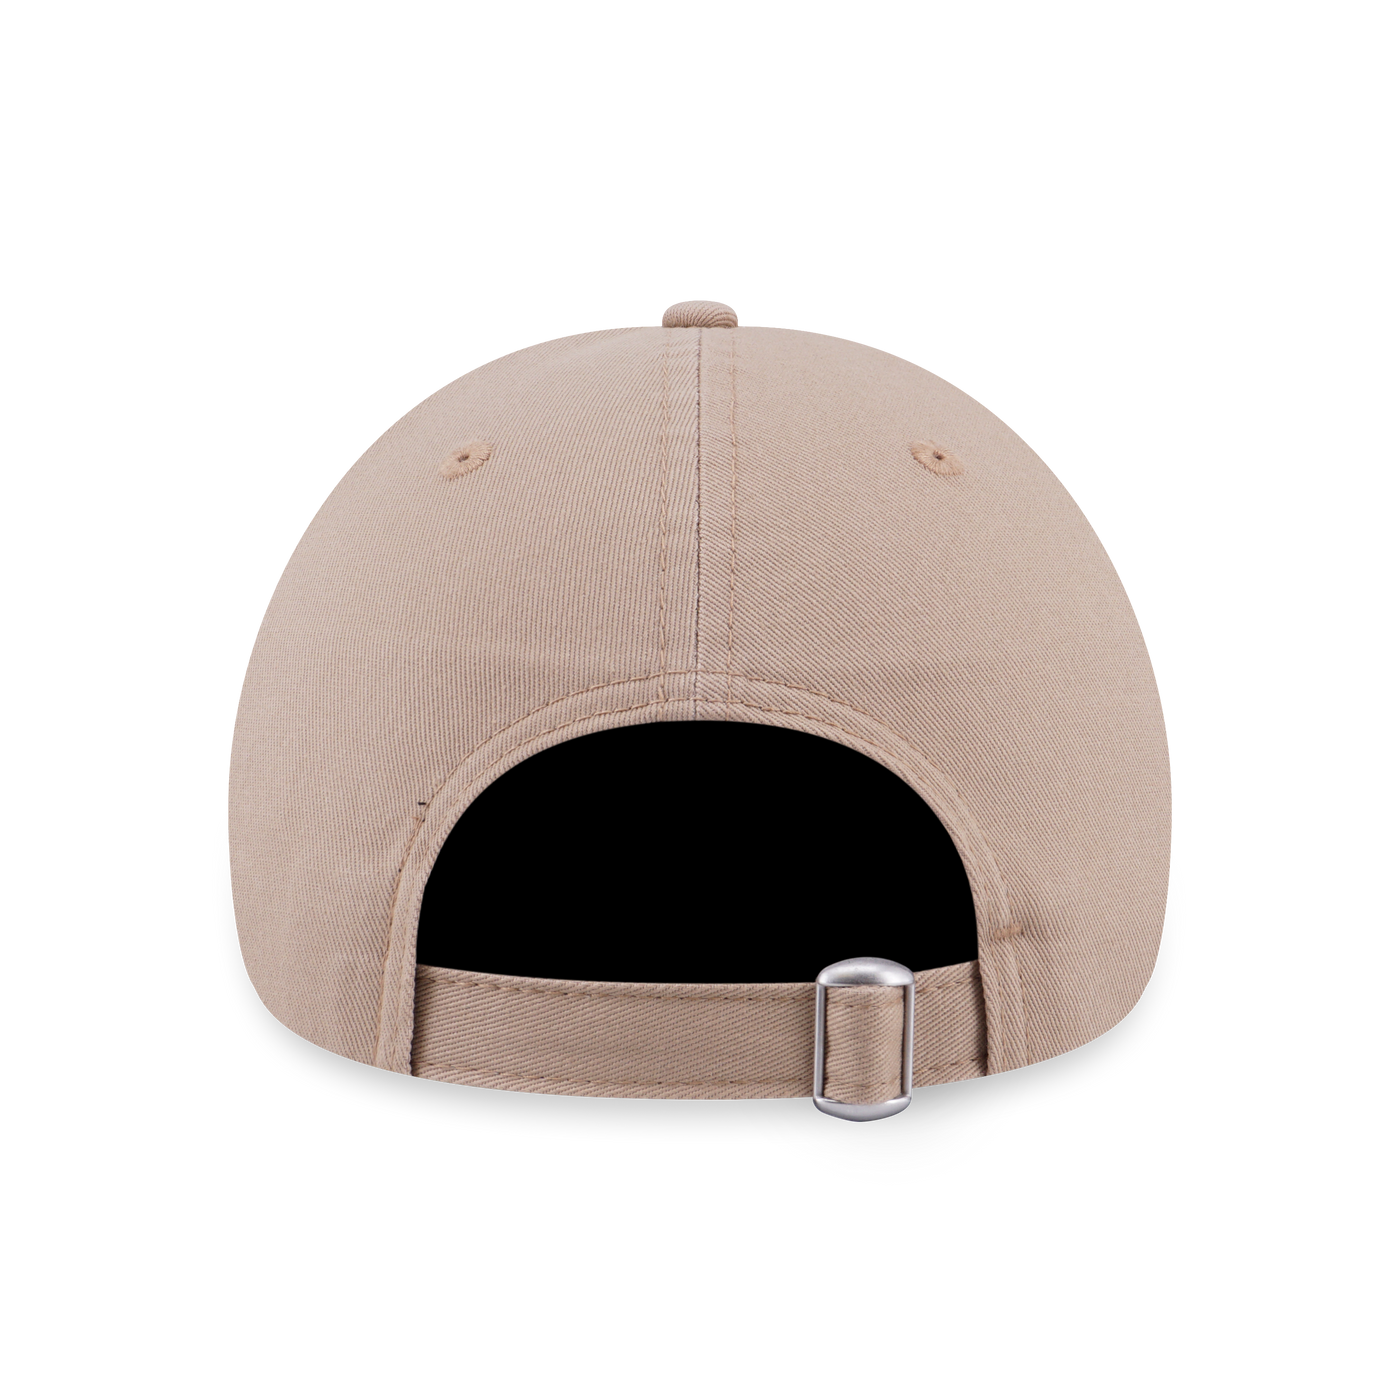 WHERE THE WILD THINGS ARE WHERE THE WILD THING LIGHT BEIGE 9FORTY UNST CAP